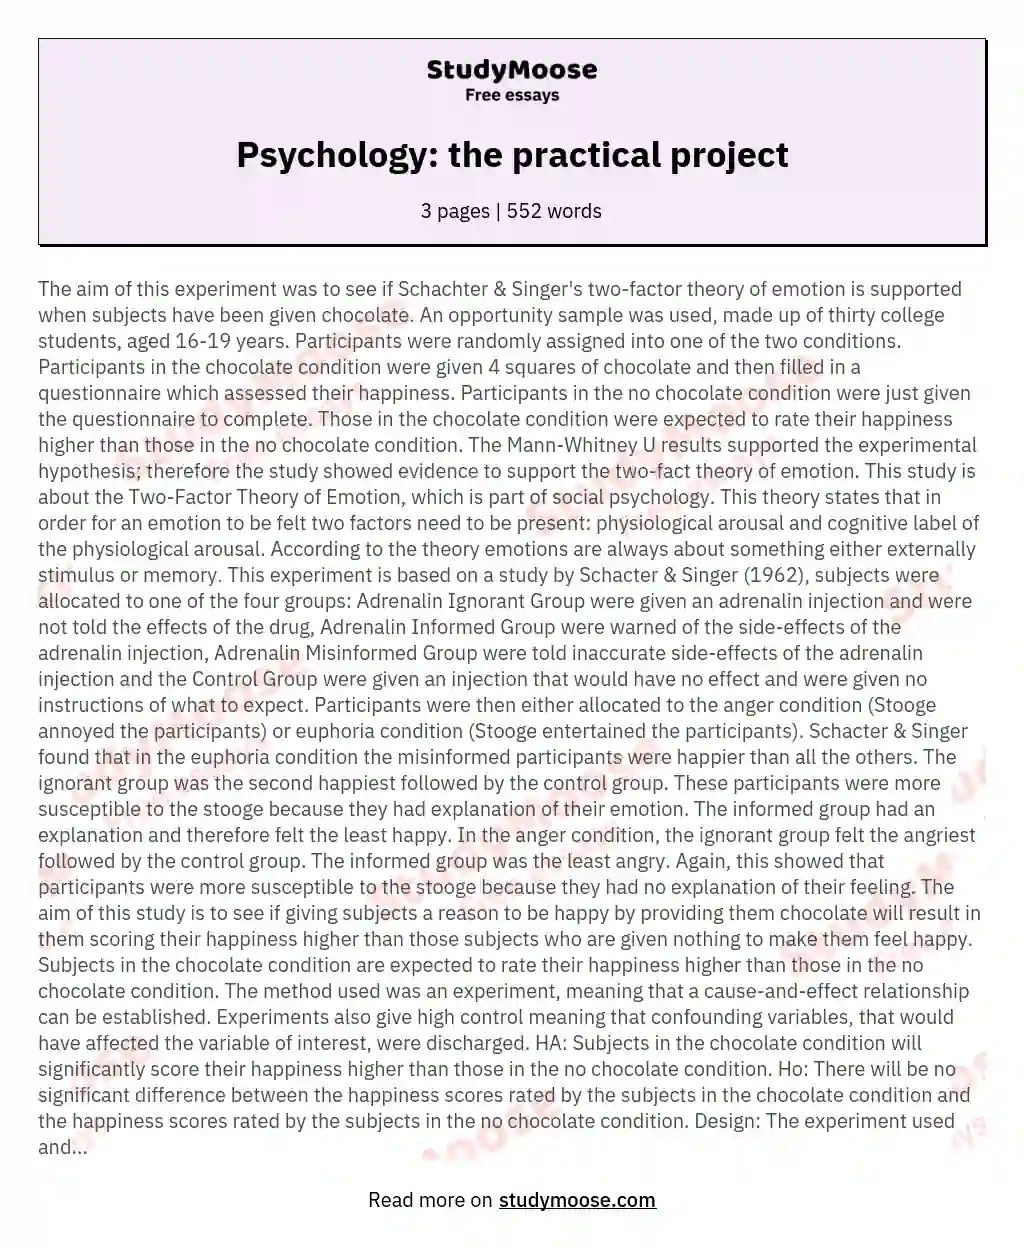 Psychology: the practical project essay